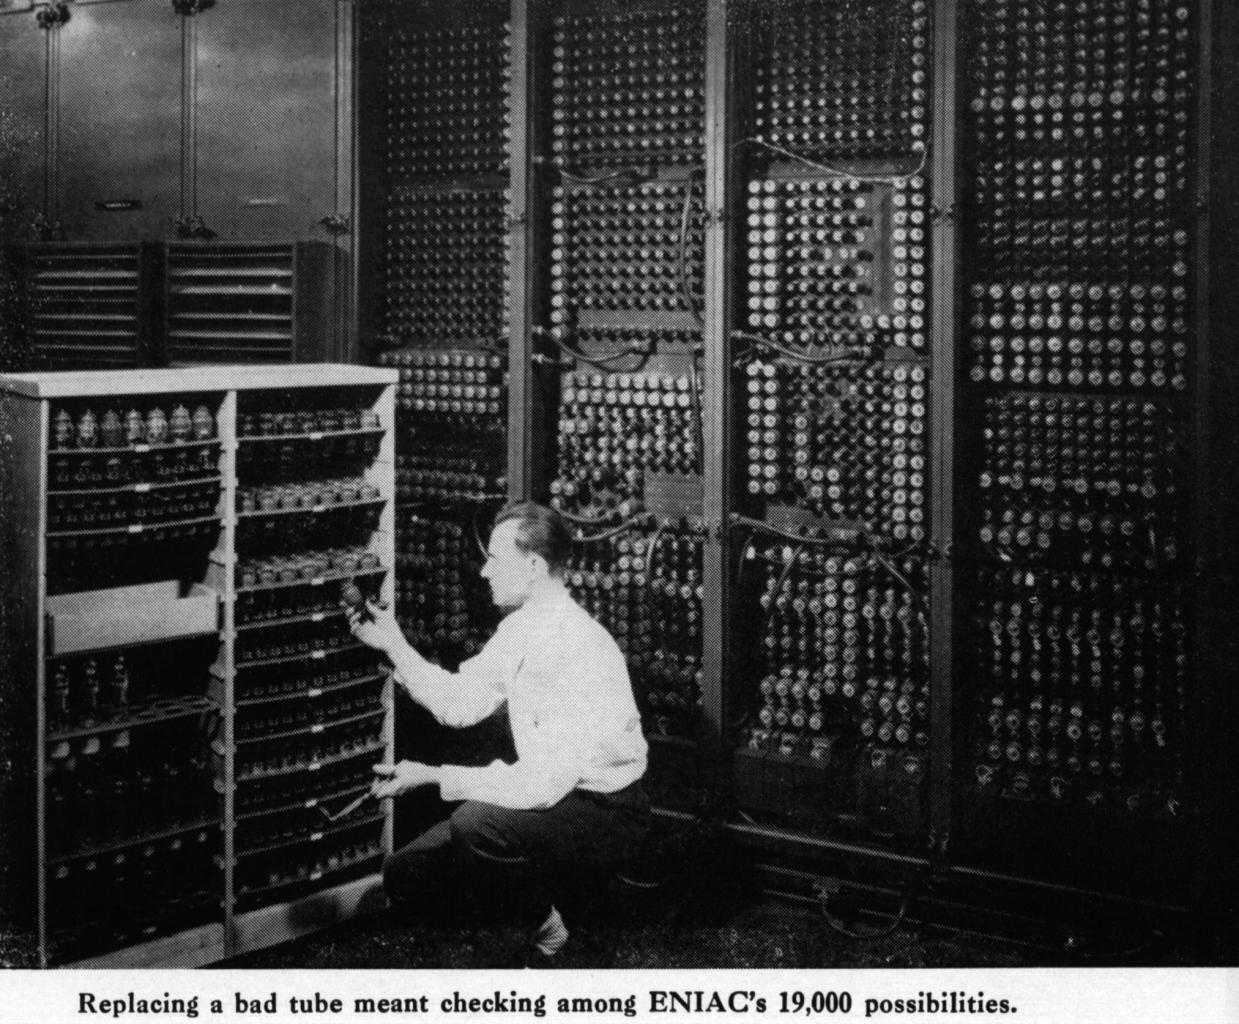 Historic Computer Images